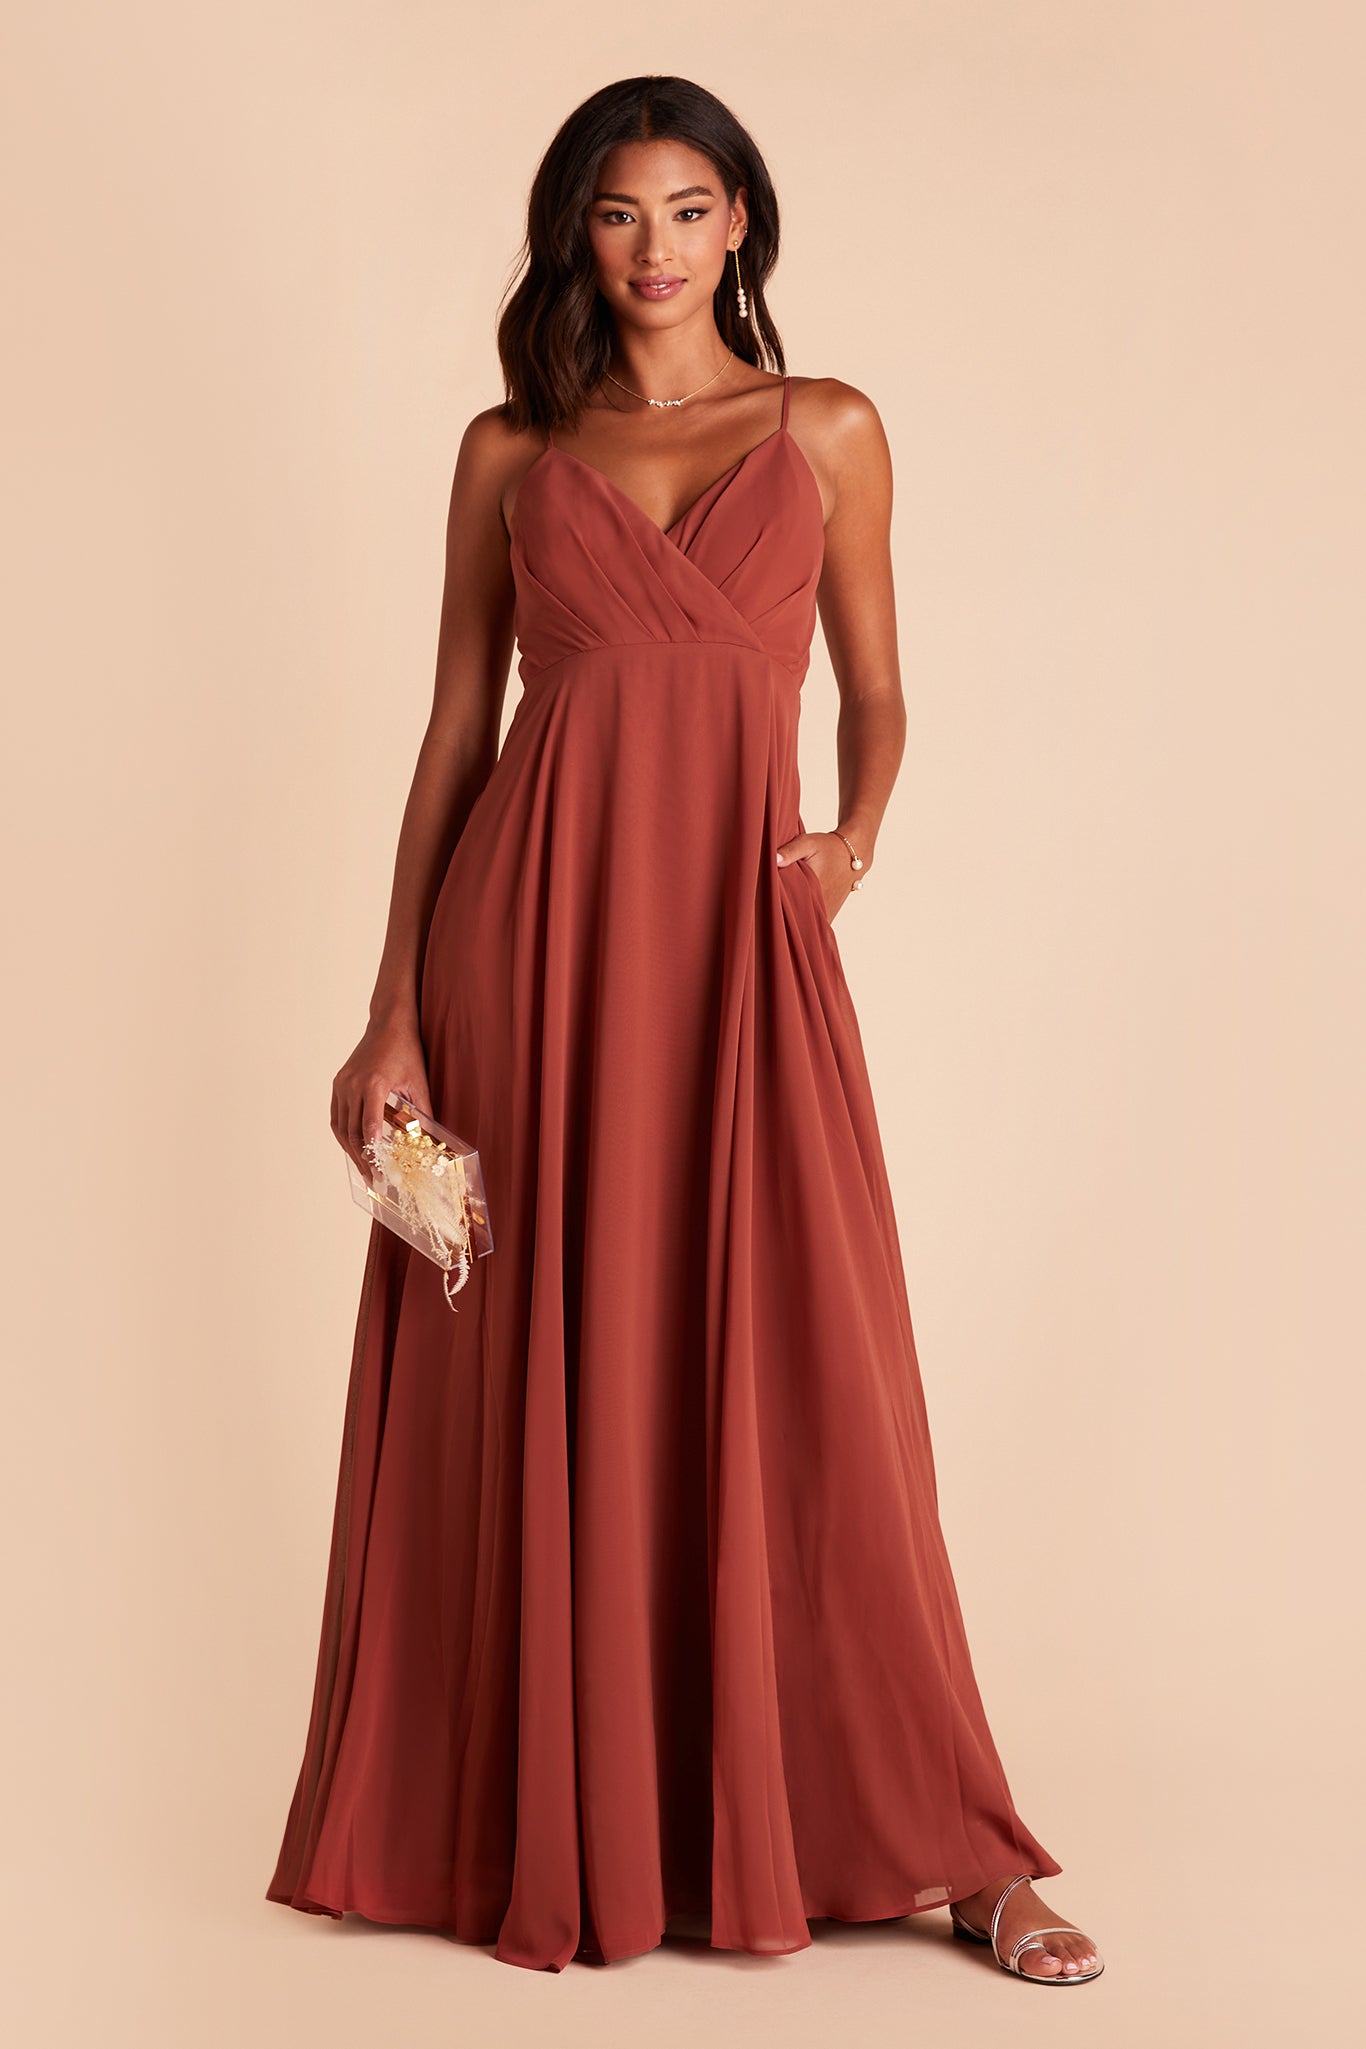 Kaia bridesmaid dress in spice chiffon by Birdy Grey, front view